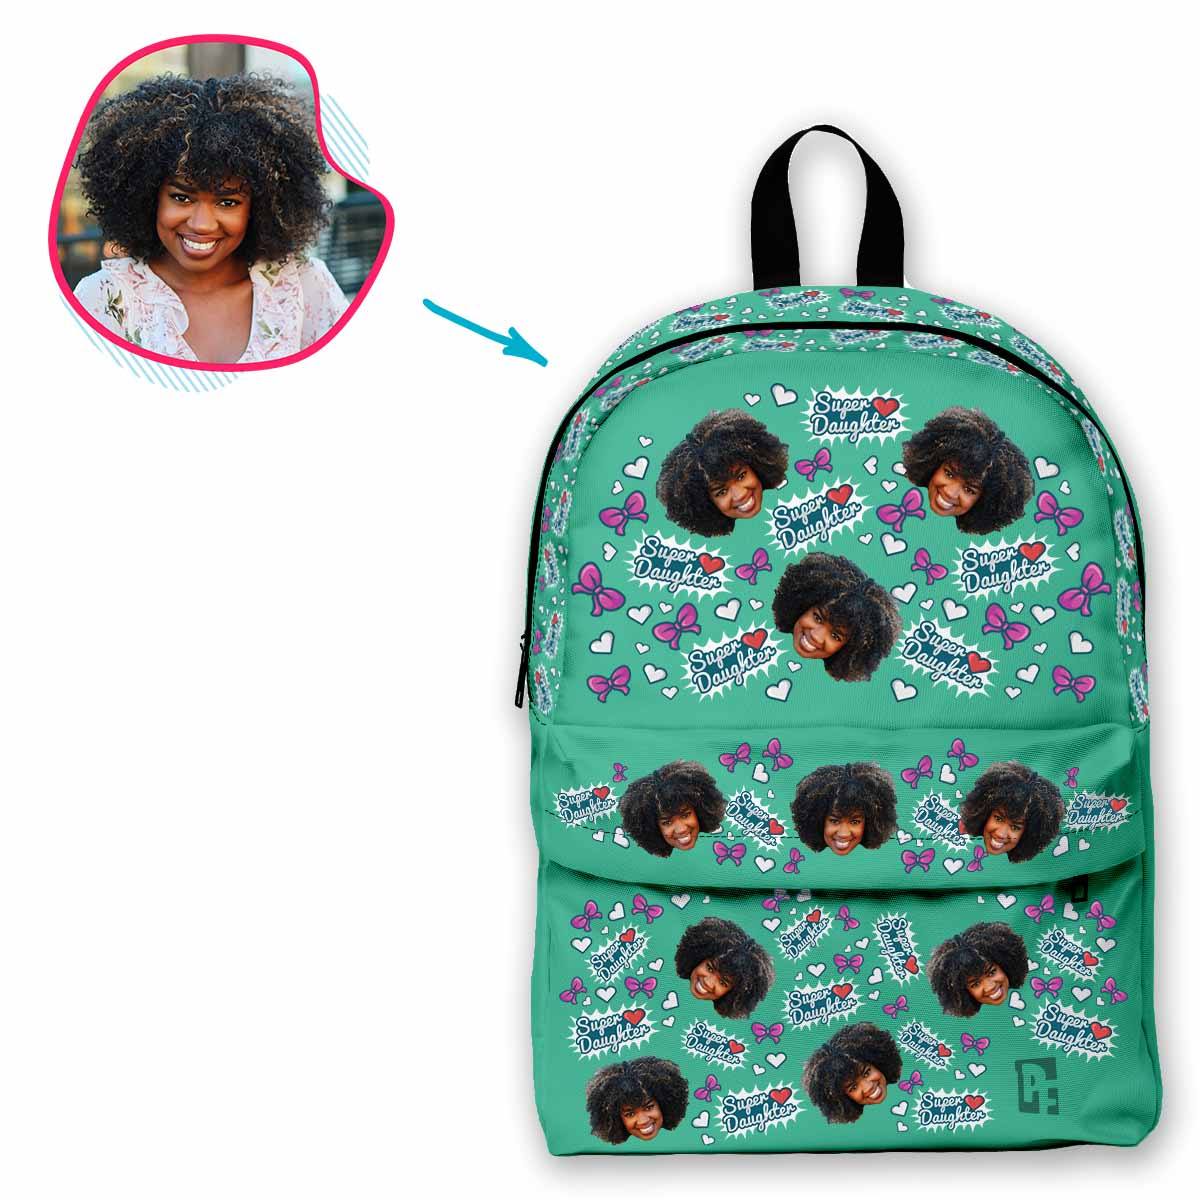 mint Super Daughter classic backpack personalized with photo of face printed on it